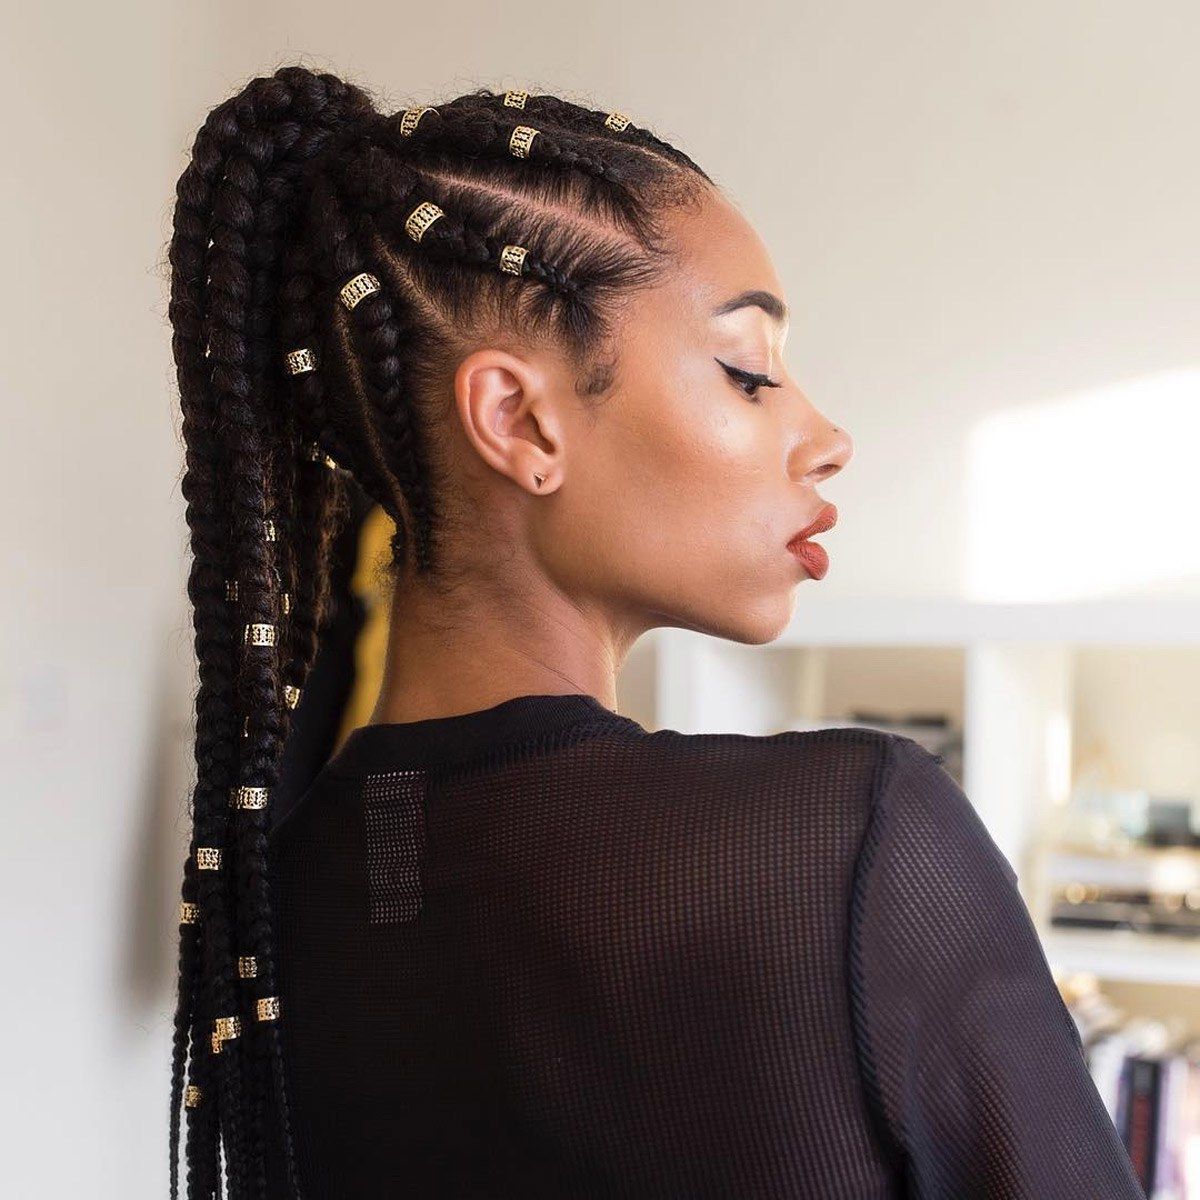 Glamour Regarding 2019 Side Pony And Raised Under Braid Hairstyles (View 1 of 20)